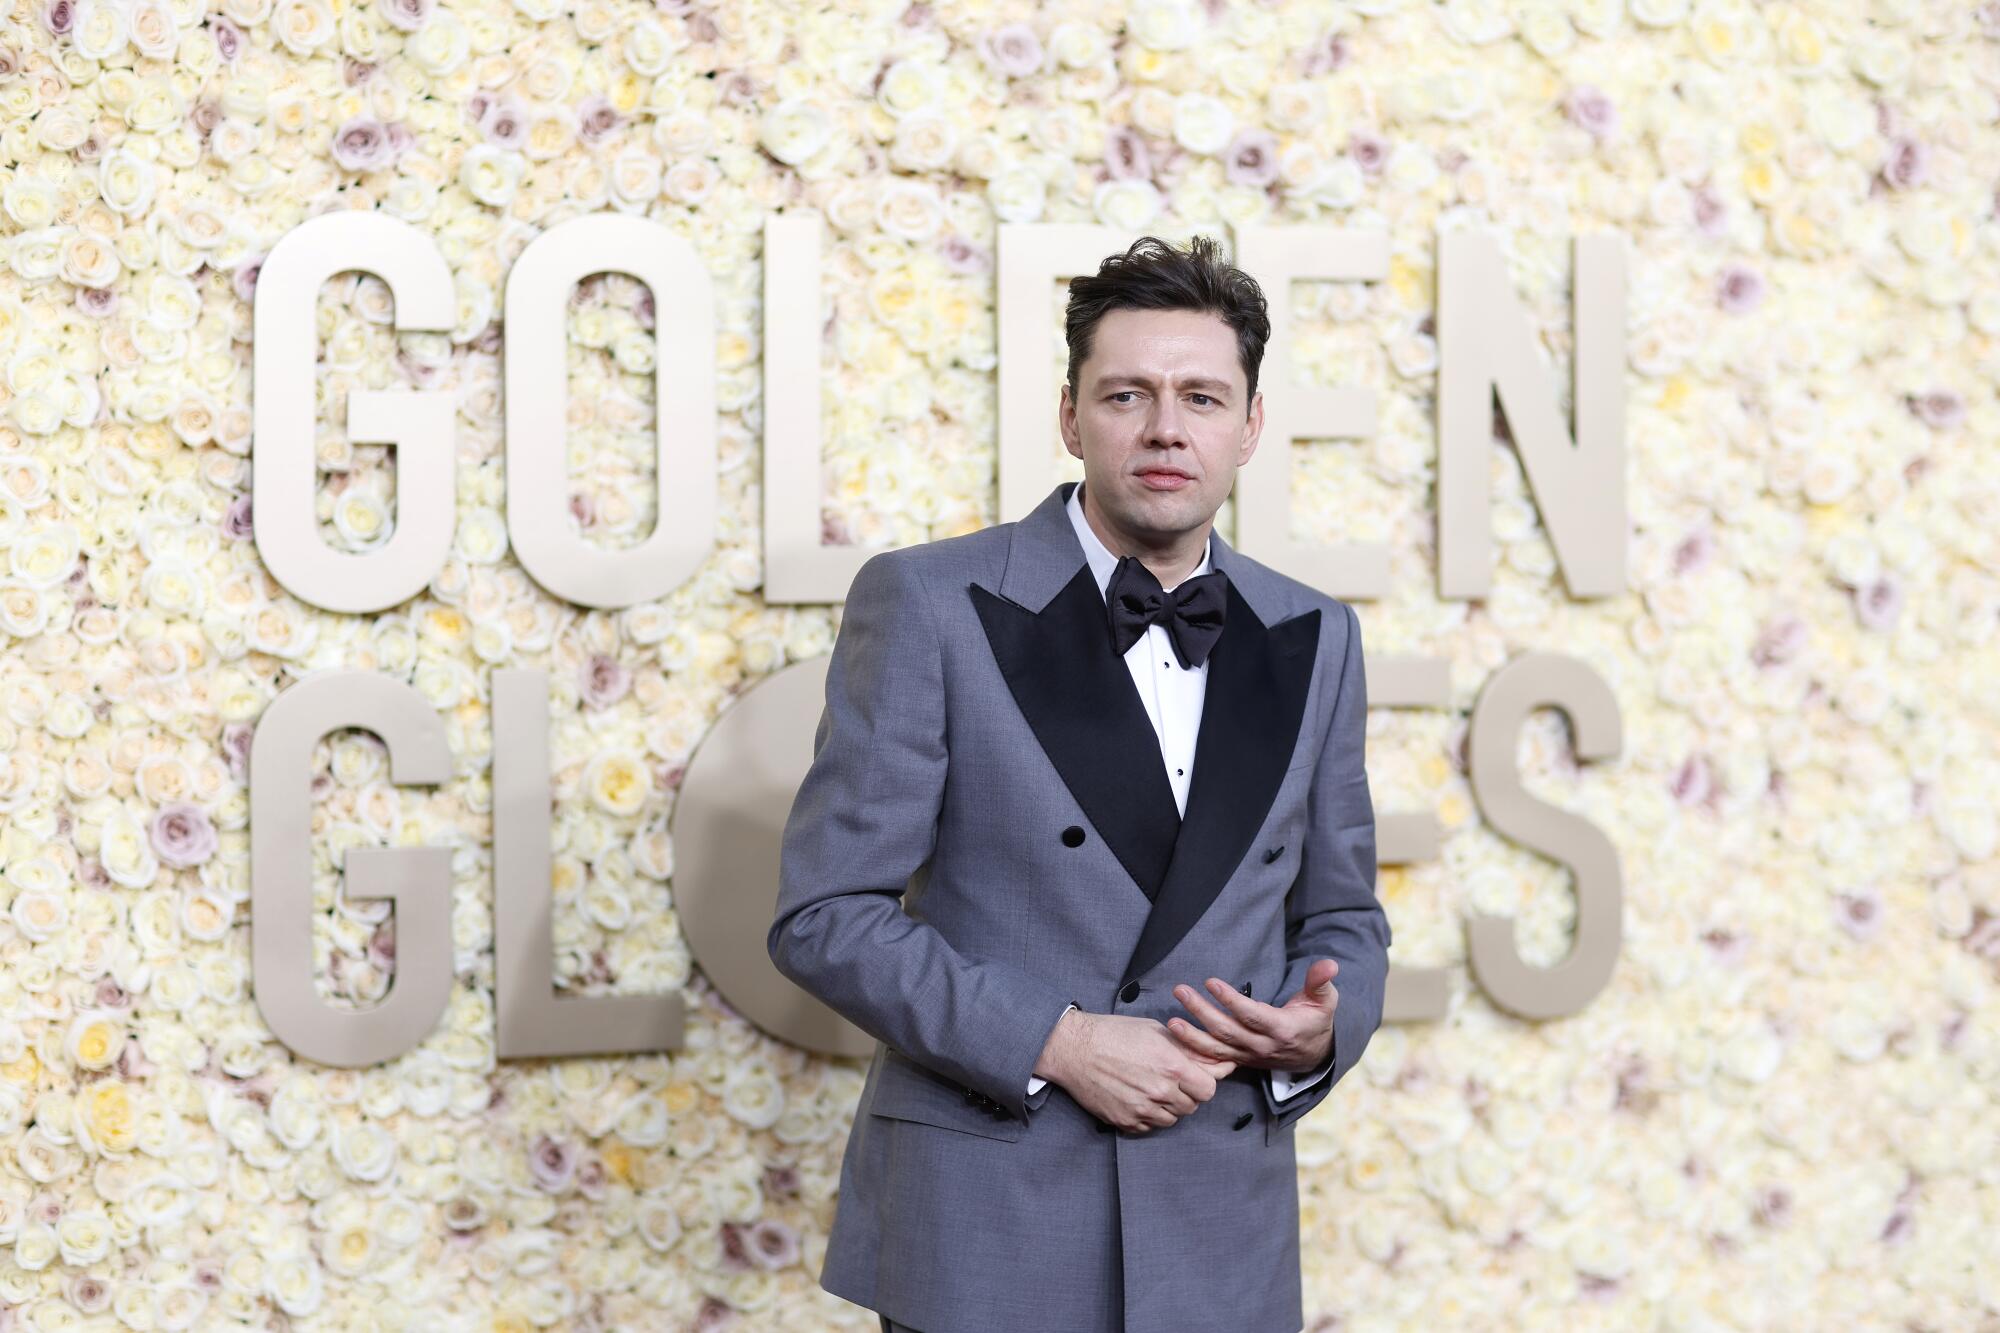 Christian Friedel on the red carpet of the 81st Golden Globe Awards at the Beverly Hilton.